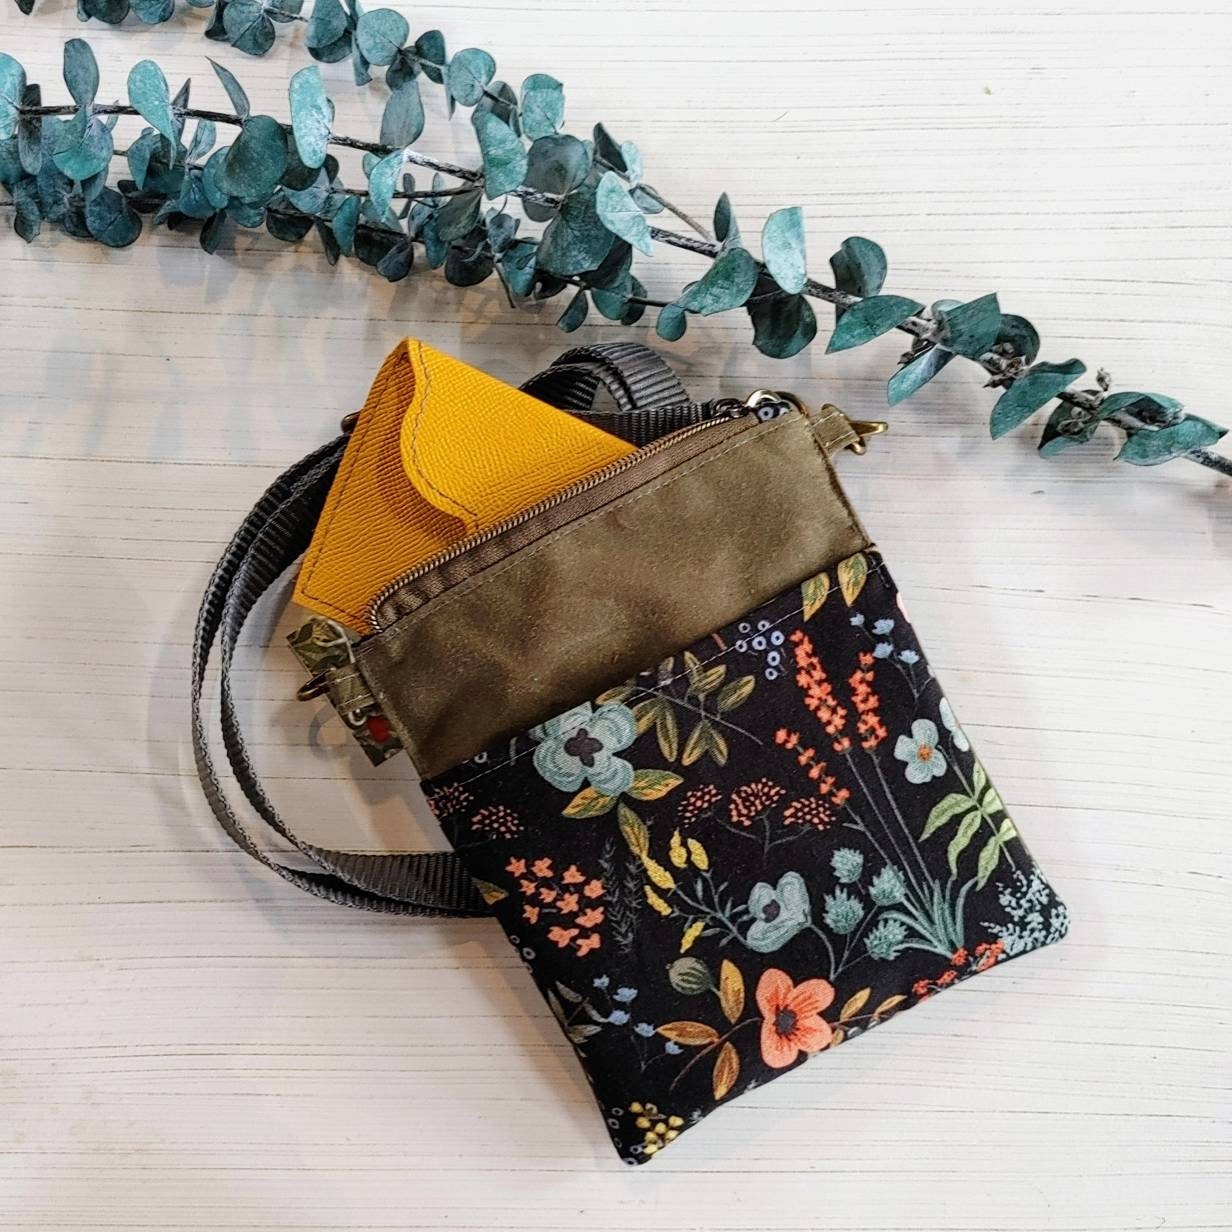 Small Cellphone Pocket Walking Bag. Perfect Size for Your - Etsy